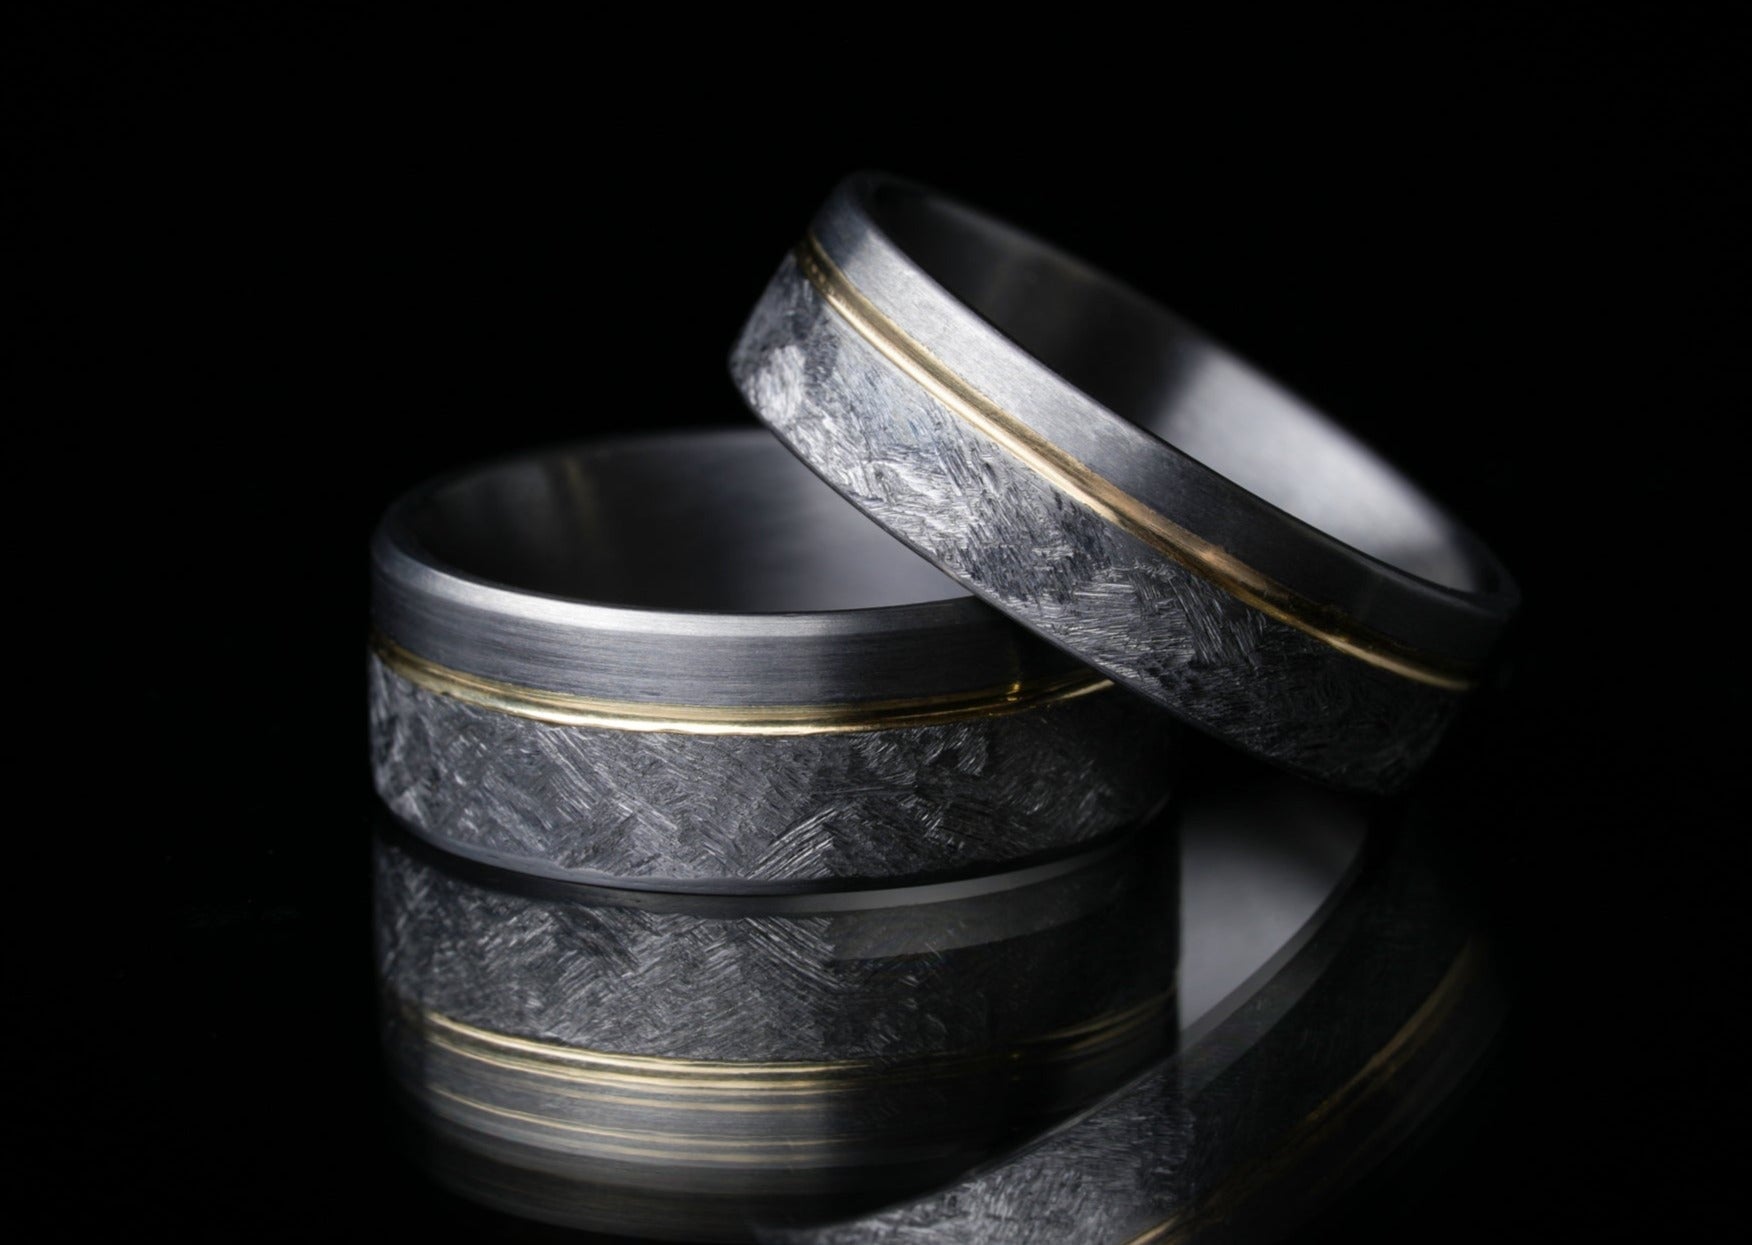 Stacked 8mm 'Rae' tantalum rings with 14k gold inlay on reflective surface